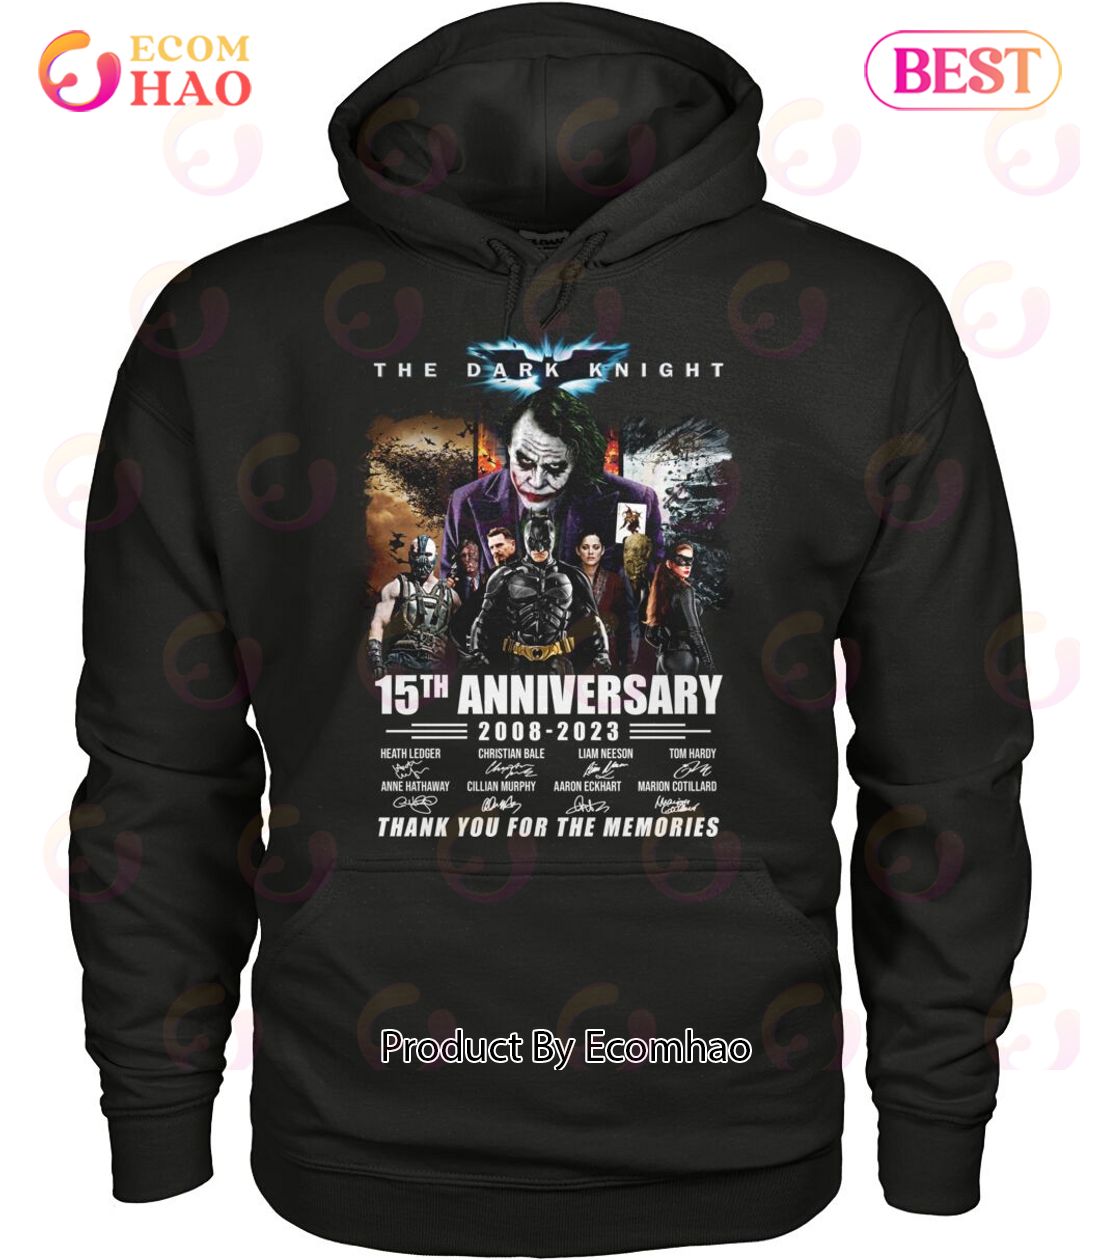 The Dark Knight 15th Anniversary 2008 - 2023 Thank You For The Memories T-Shirt